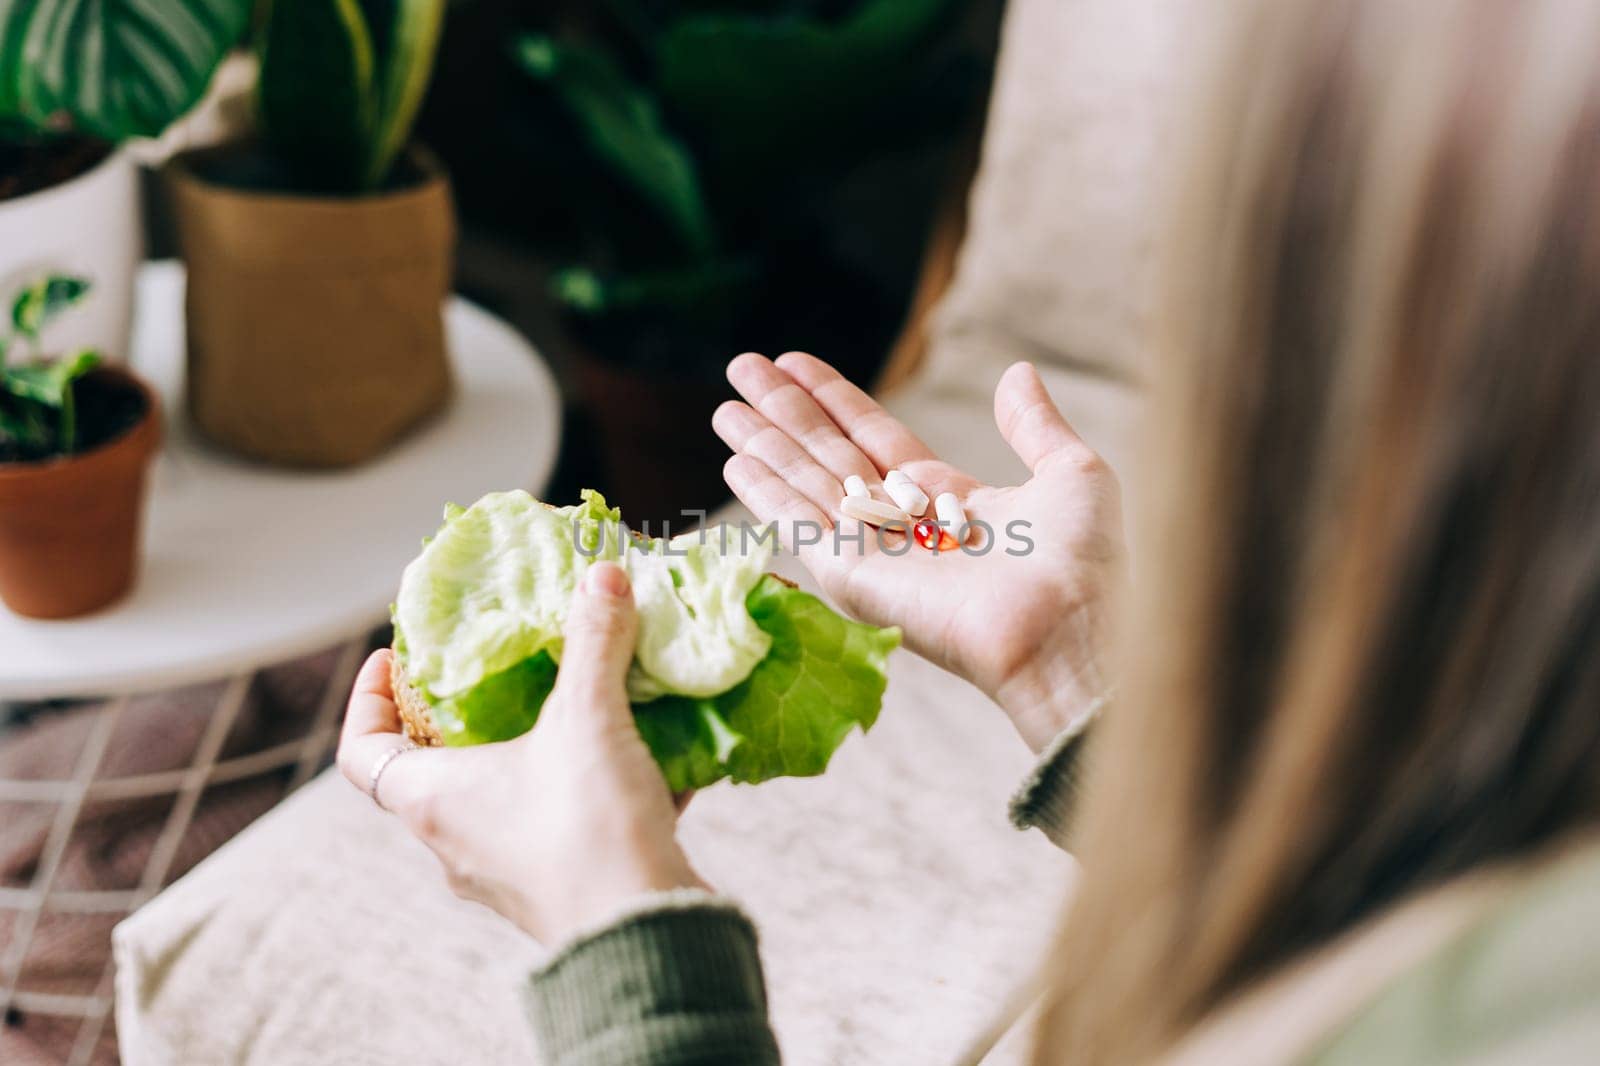 Close up of woman hands holding and choosing vegetables or tablet vitamin pills. Girl in living room with plants at home, healthy lifestyle concept.